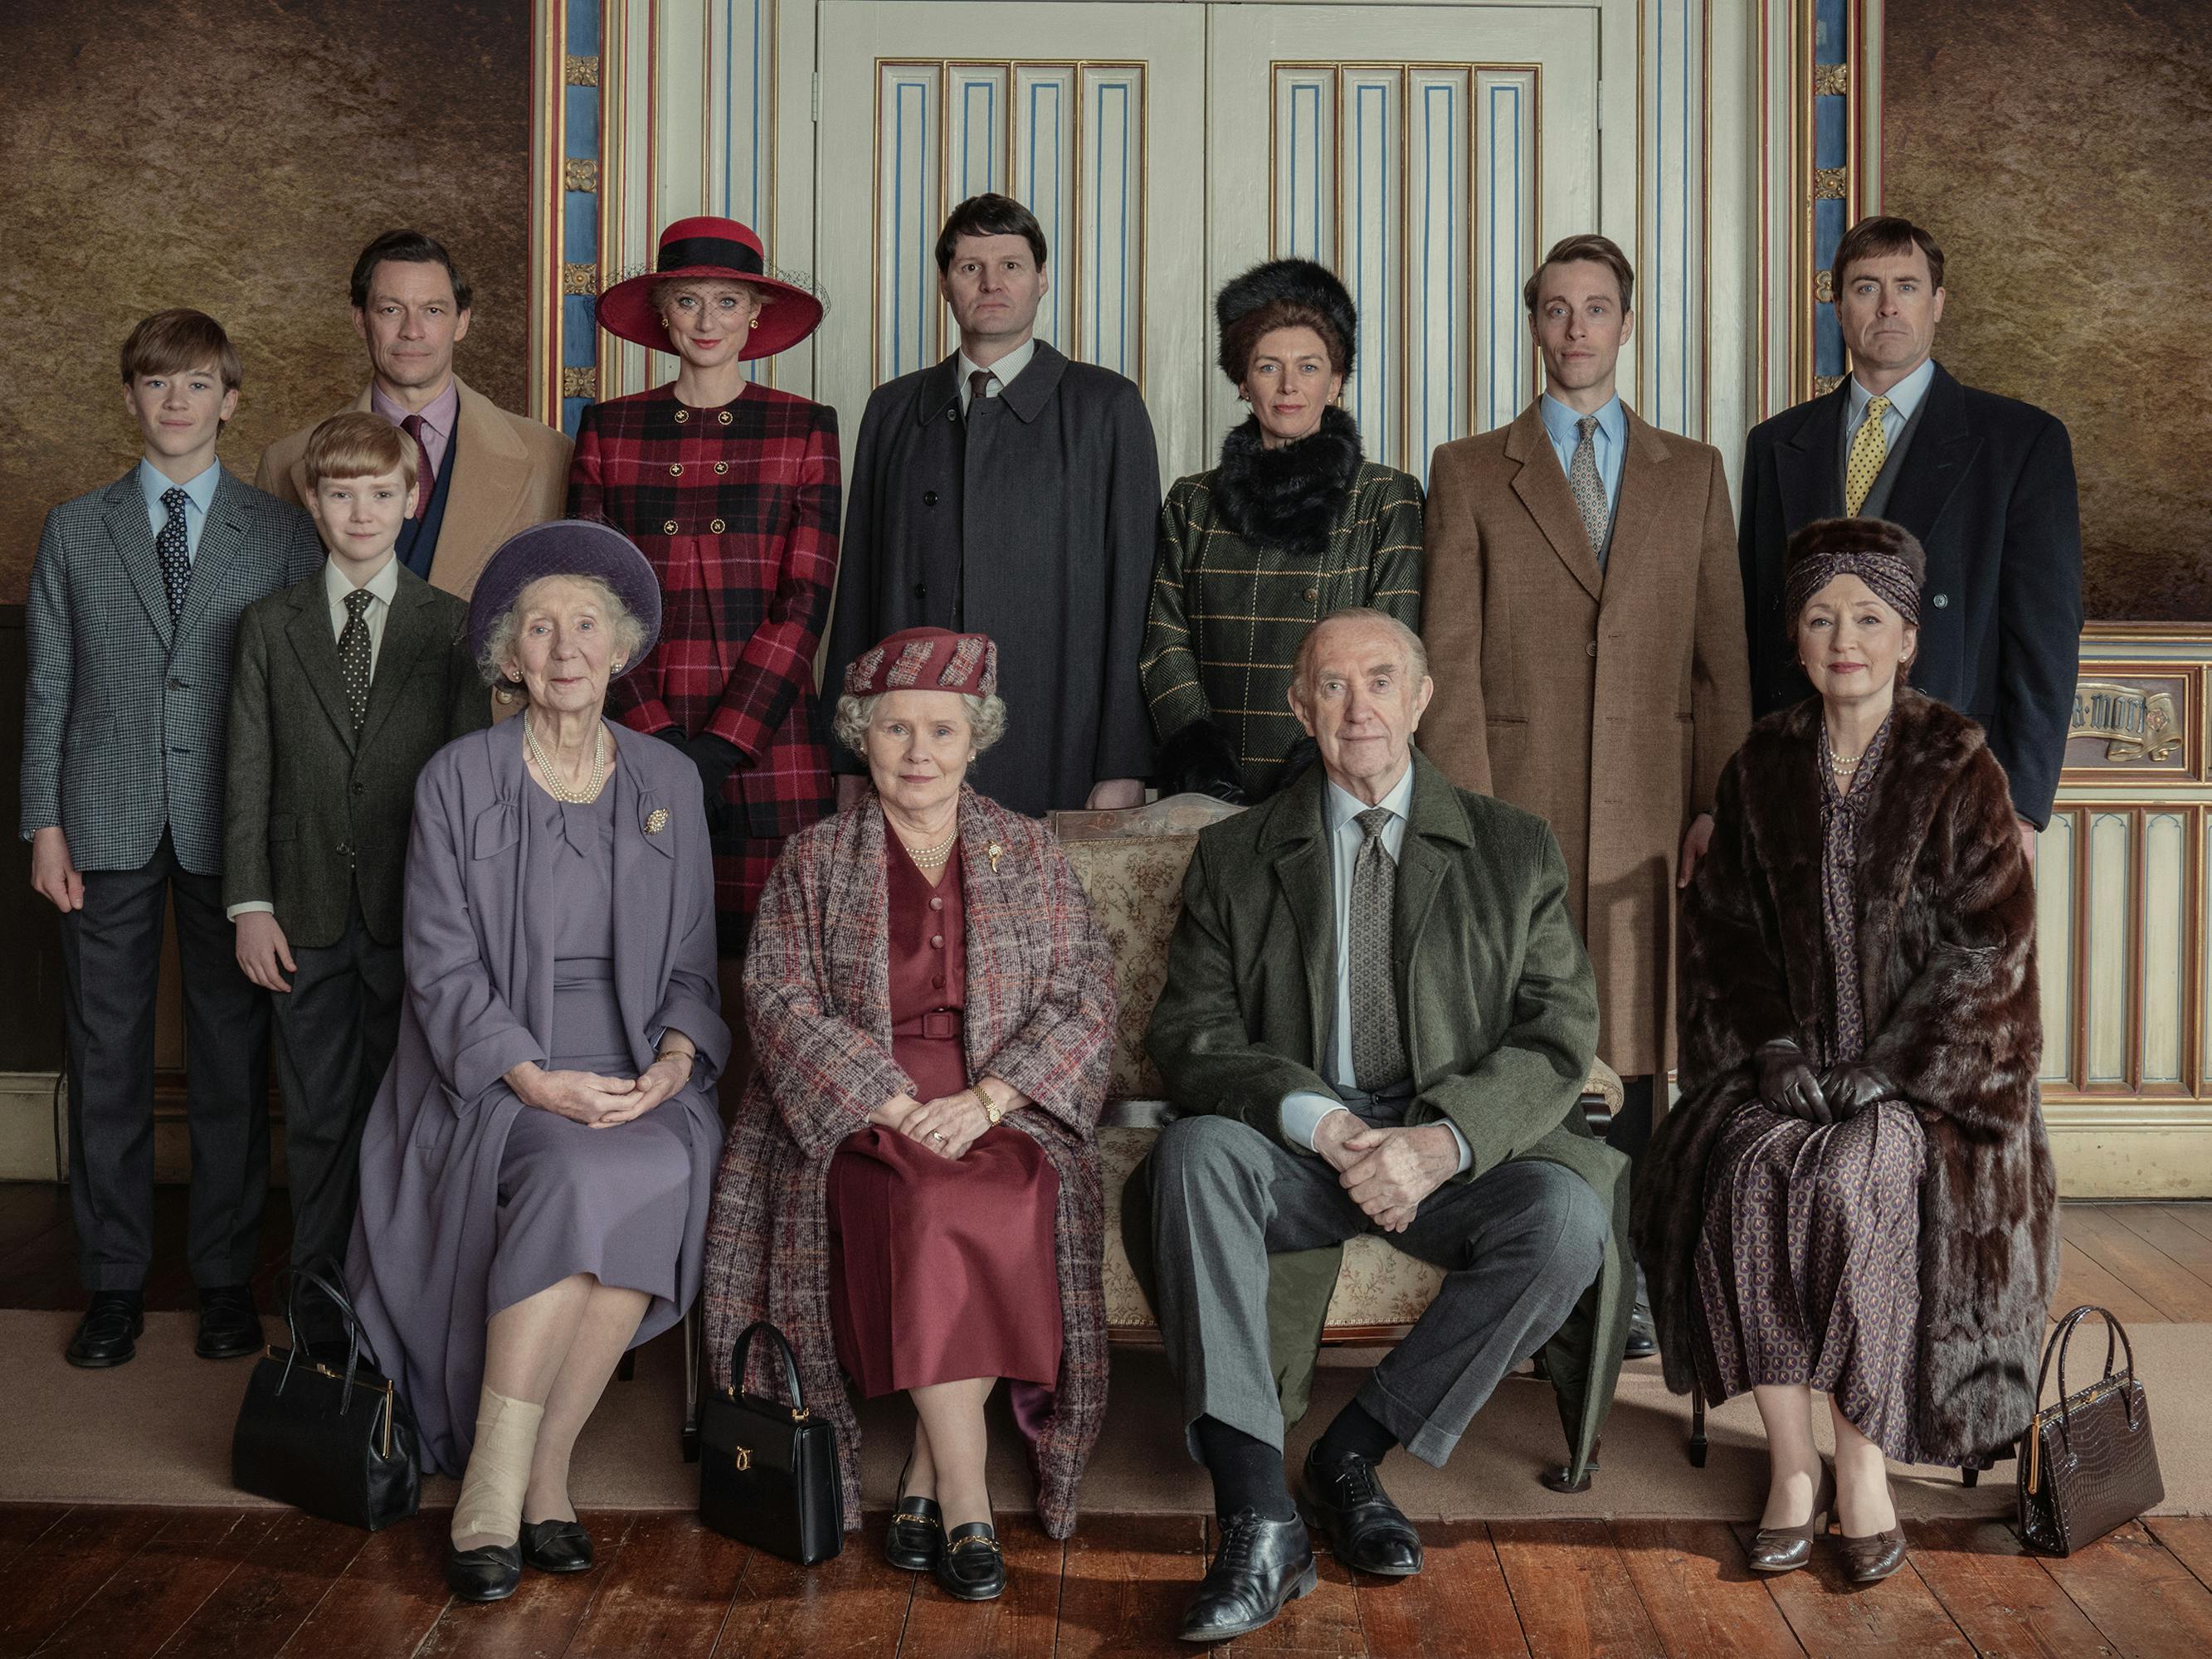 Prince William (Senan West), Prince Harry (Will Powell), Prince Charles (Dominic West), Queen Elizabeth the Queen Mother (Marcia Warren), Princess Diana (Elizabeth Debicki), Queen Elizabeth (Imelda Staunton), Timothy Laurence (Theo Fraser Steele), Princess Anne (Claudia Harrison), Prince Philip (Jonathan Pryce), Prince Edward (Sam Woolf), Princess Margaret (Lesley Manville), and Prince Andrew (James Murray) pose for a picture.